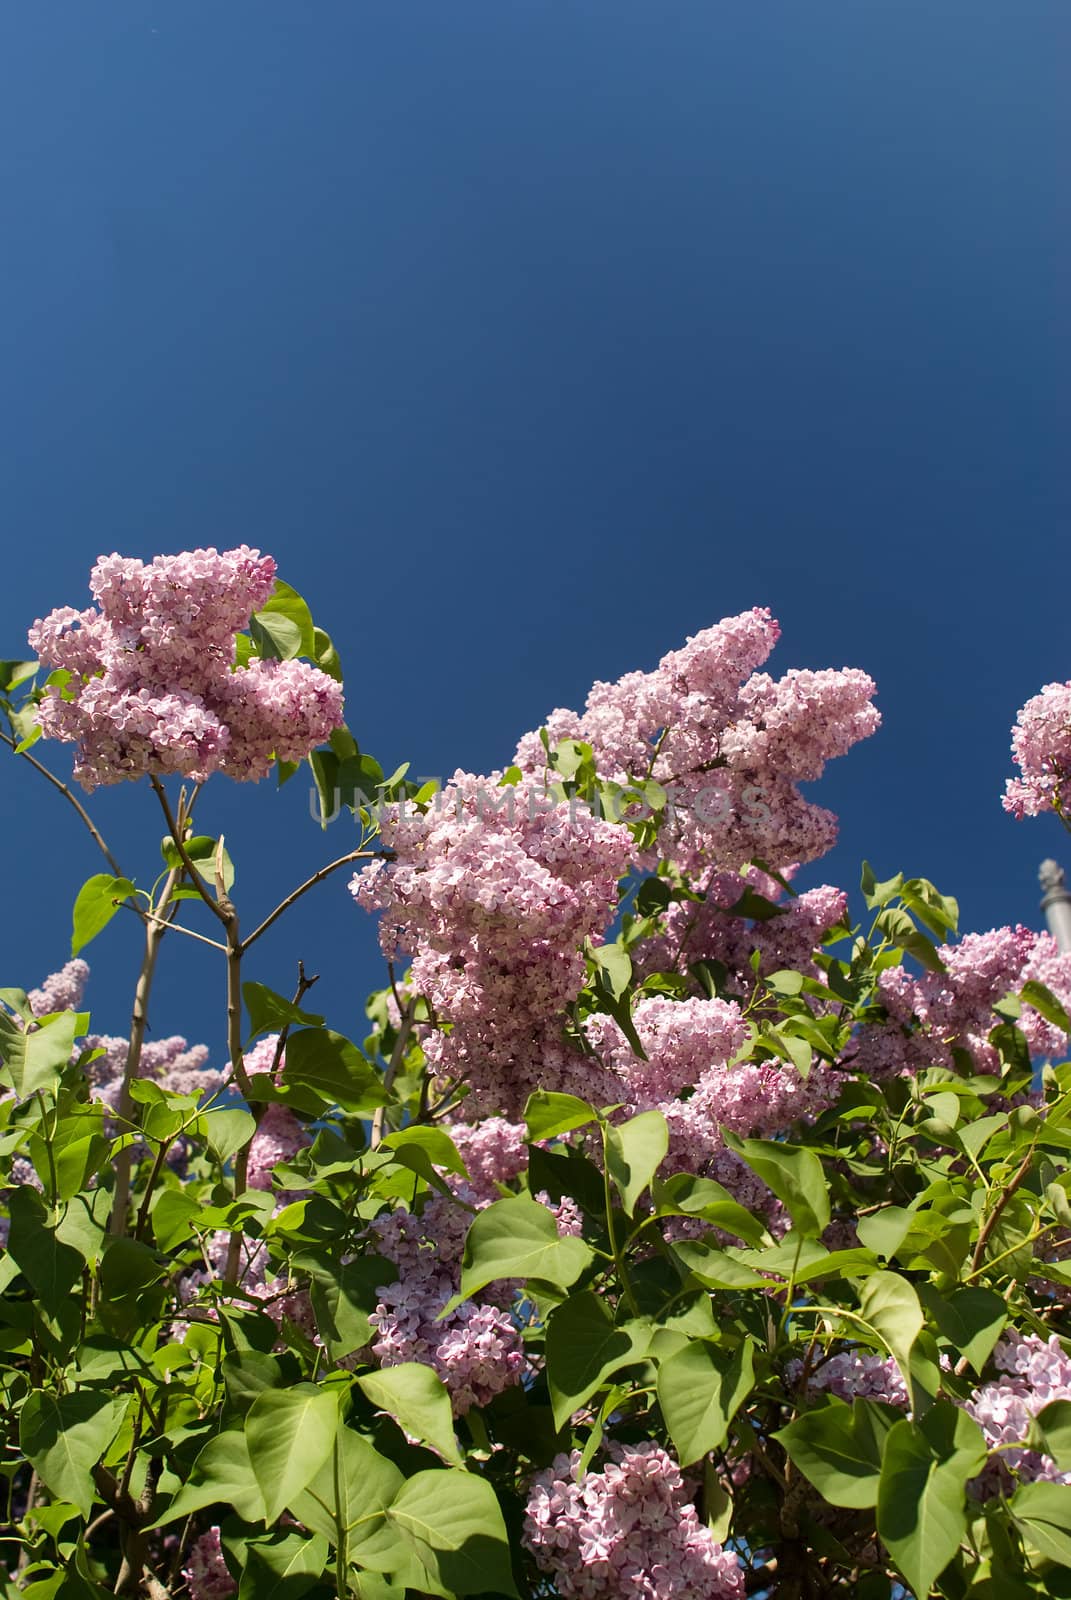 Lilac branches against blue sky